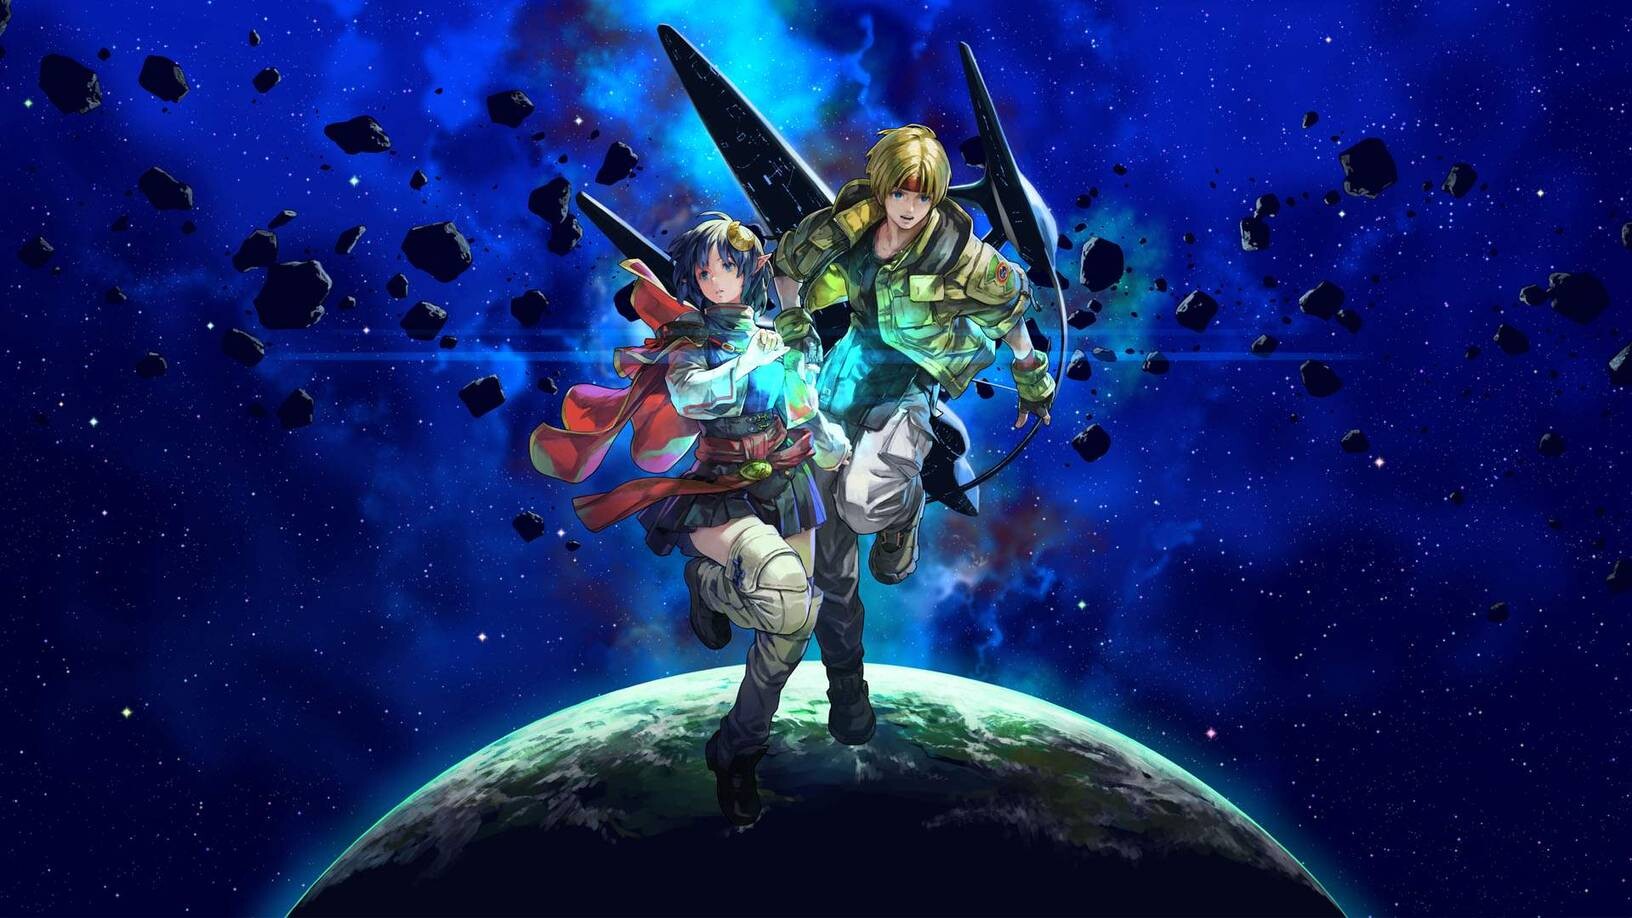 Star Ocean: First Departure R - Character Artworks and Bios